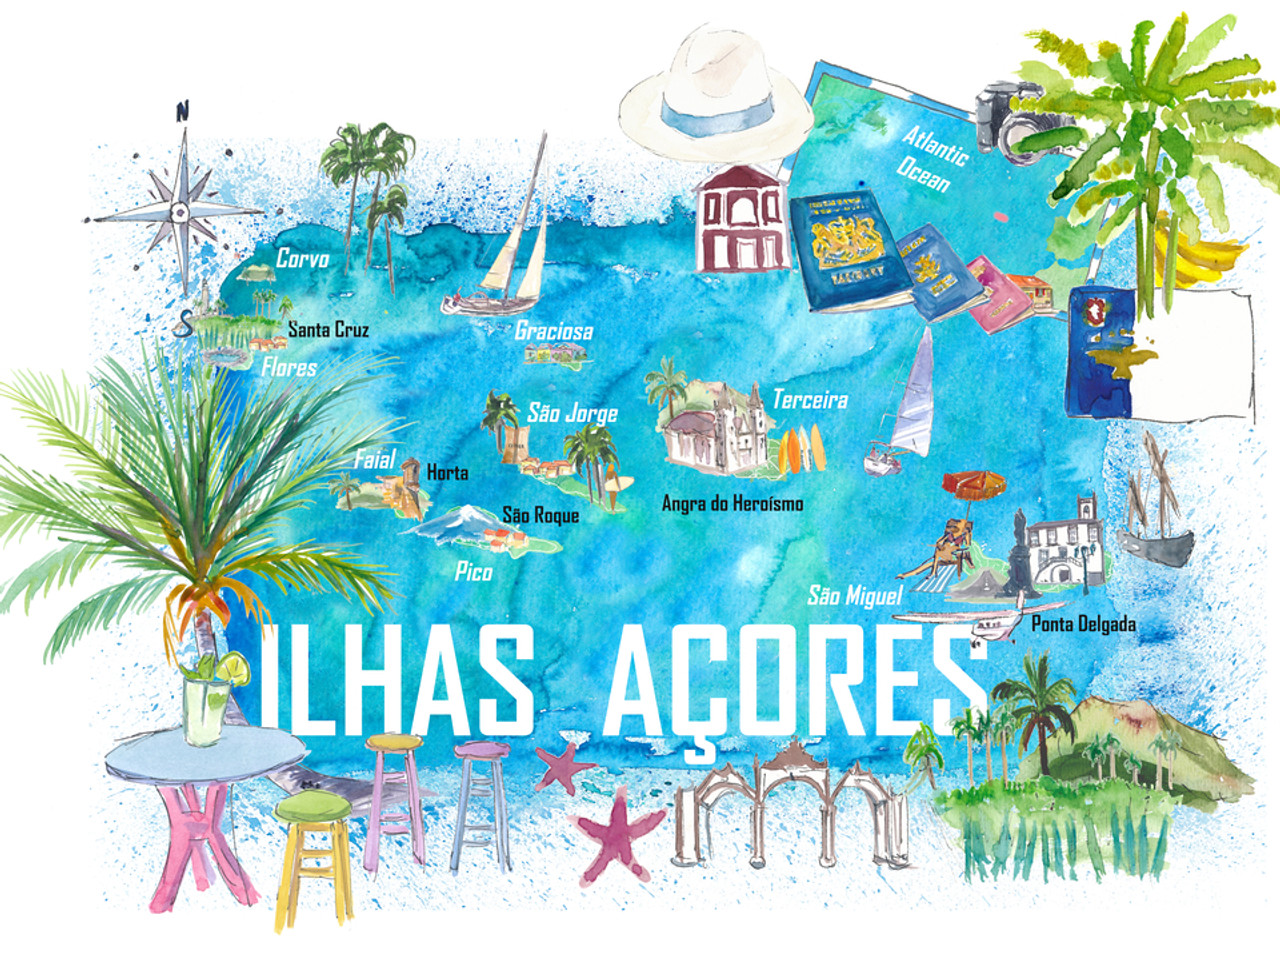 Azores Islands Portugal Illustrated Travel with Tourist Highlights - Made and Curated